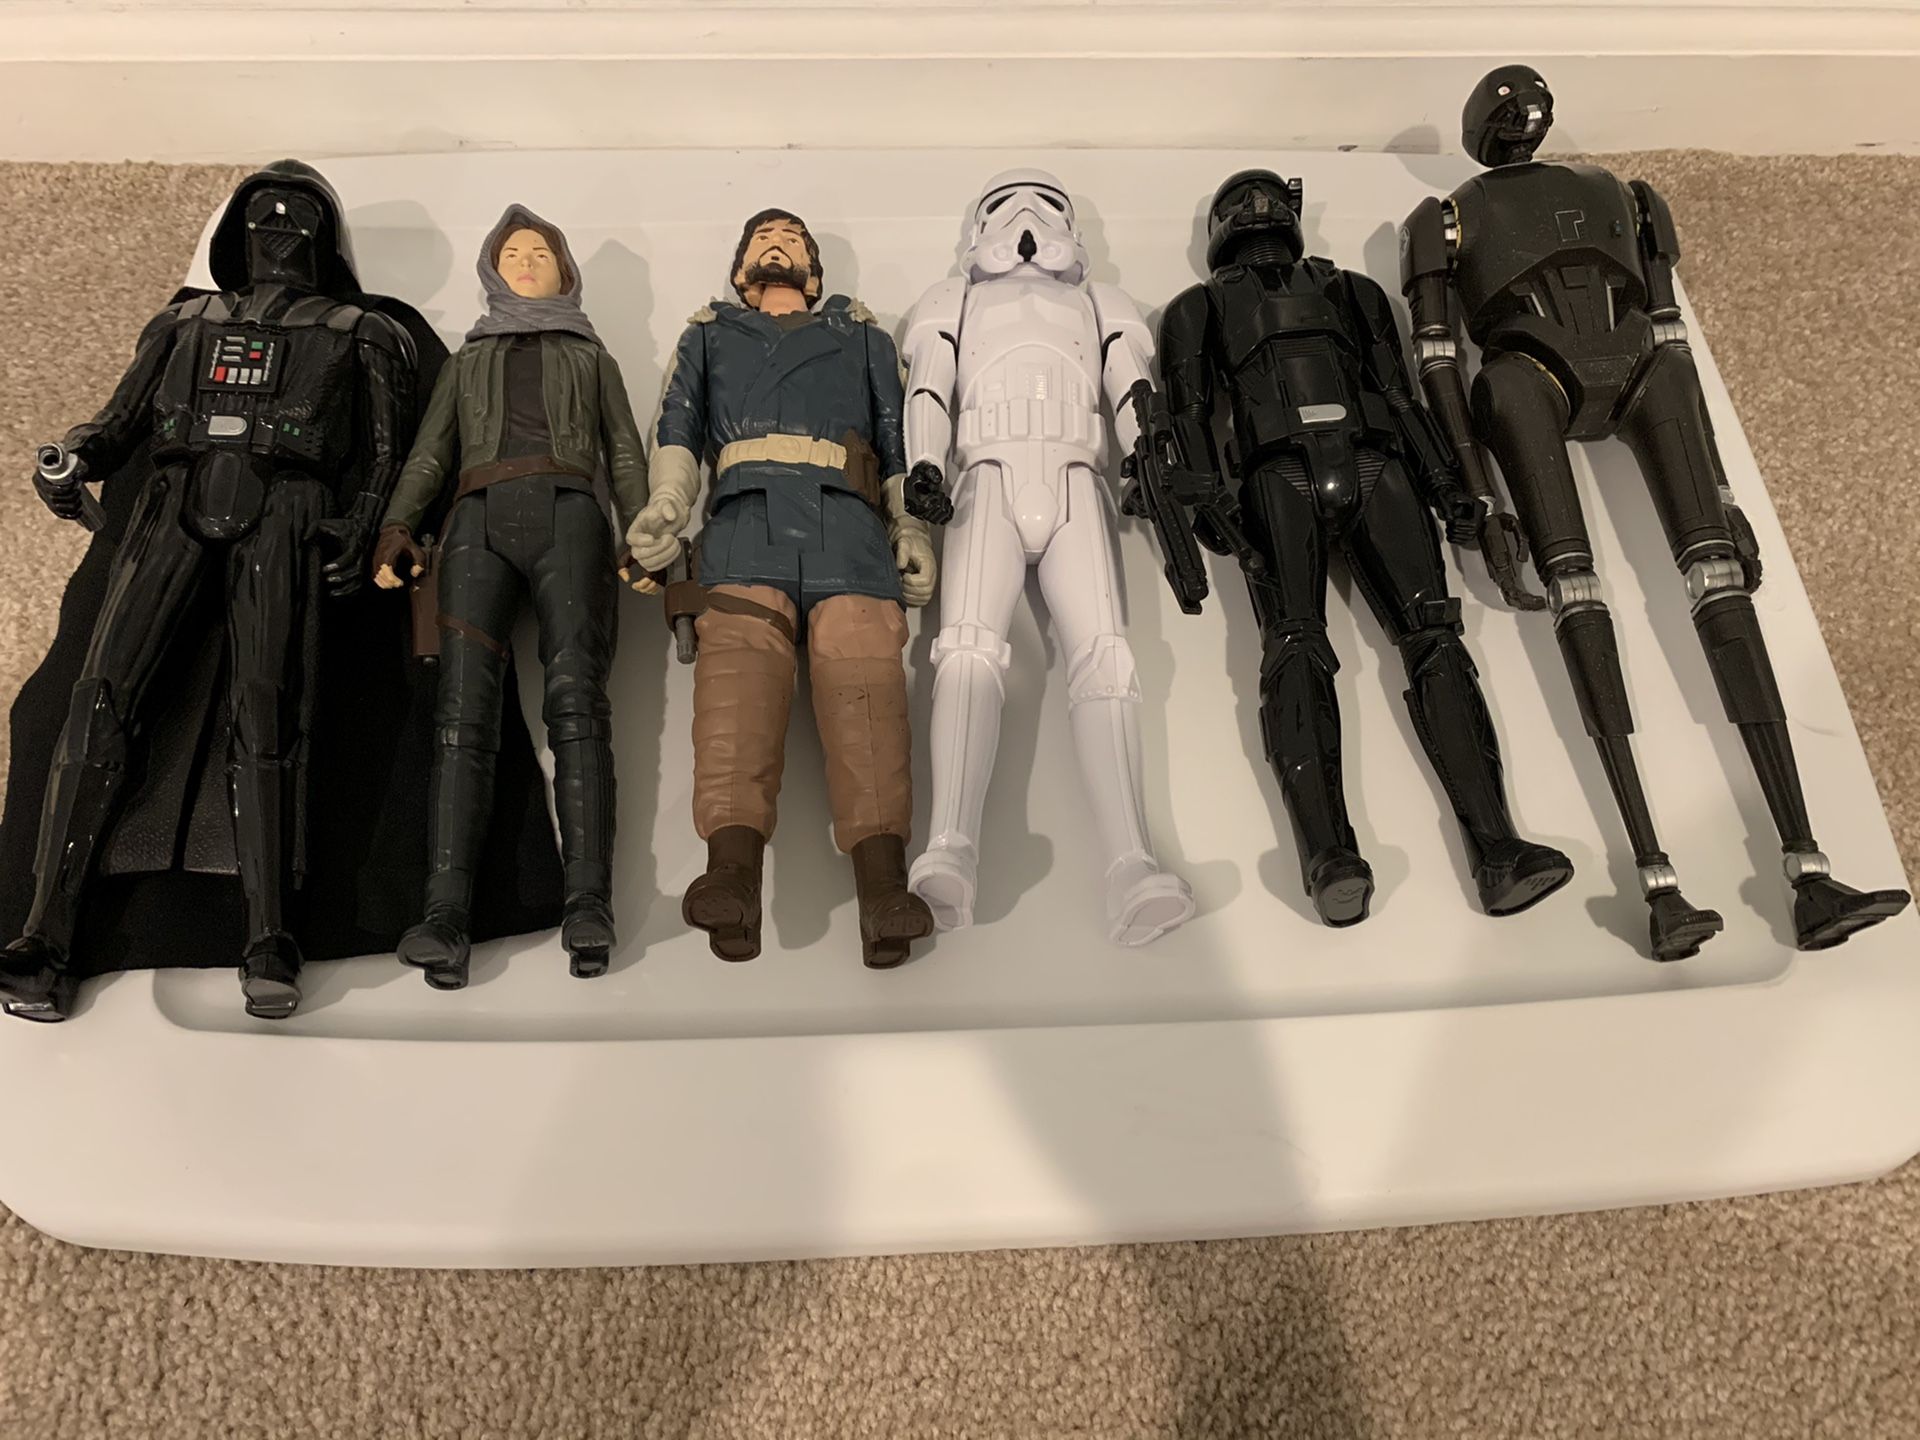 STAR WARS - all six 12” figurines as a set for $30